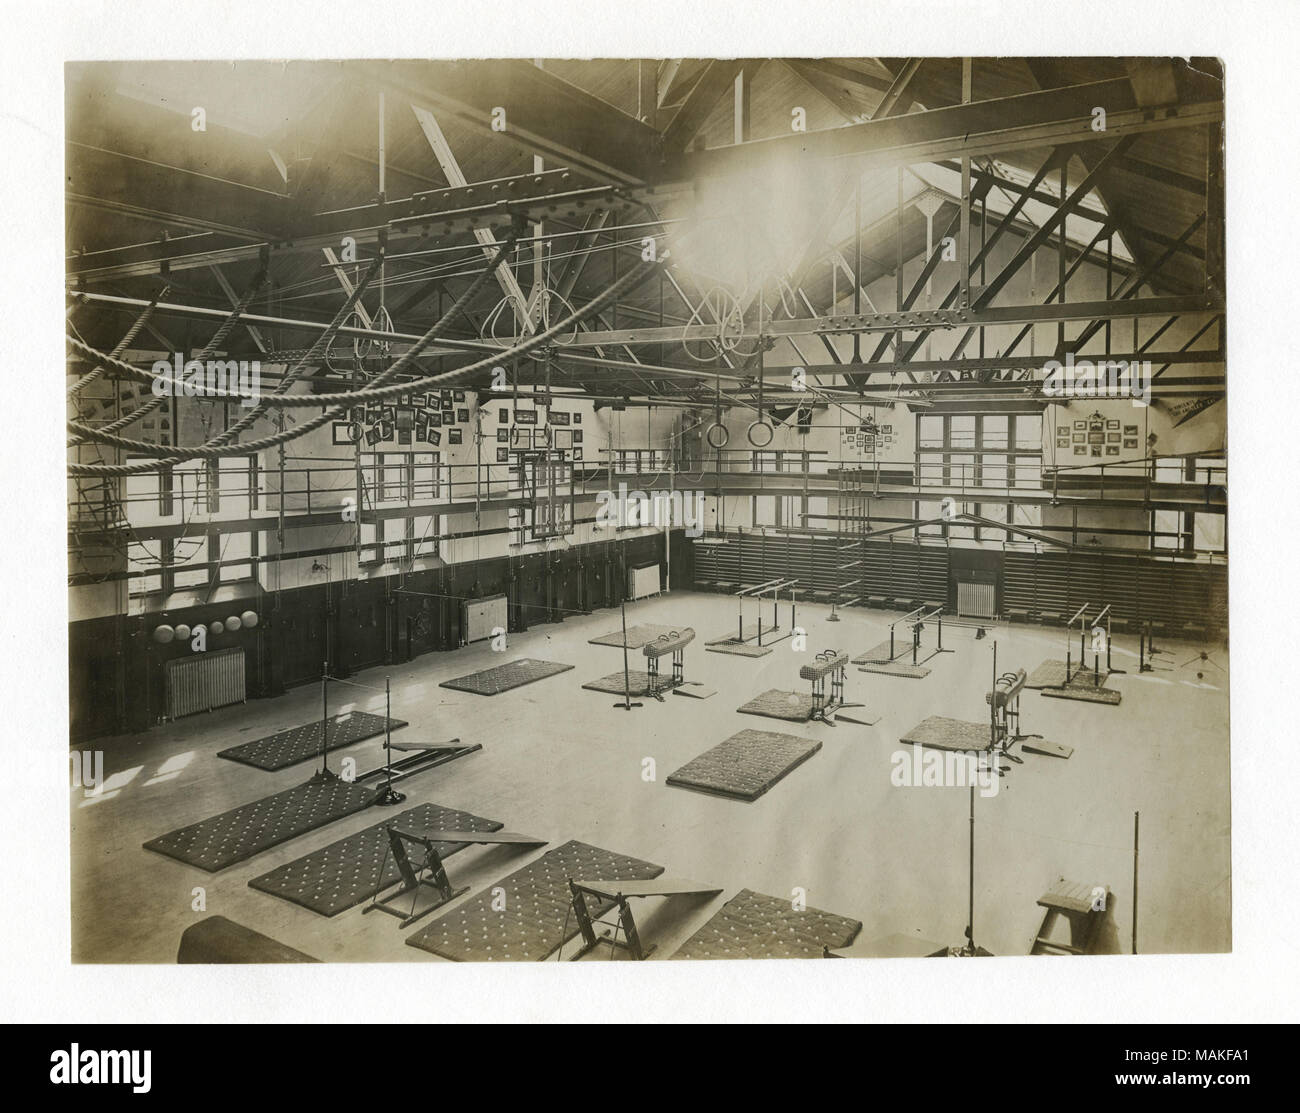 Horizontal photograph of the interior of a large gym. Equipment and mats are spread out on the floor. Title: A.G. Spalding and Bros. Model Gymnasium, Physical Culture Exhibit, Louisiana Purchase Exposition. (1904 Olympics). With overhead apparatus drawn up and out of the way.  . 1904. Stock Photo